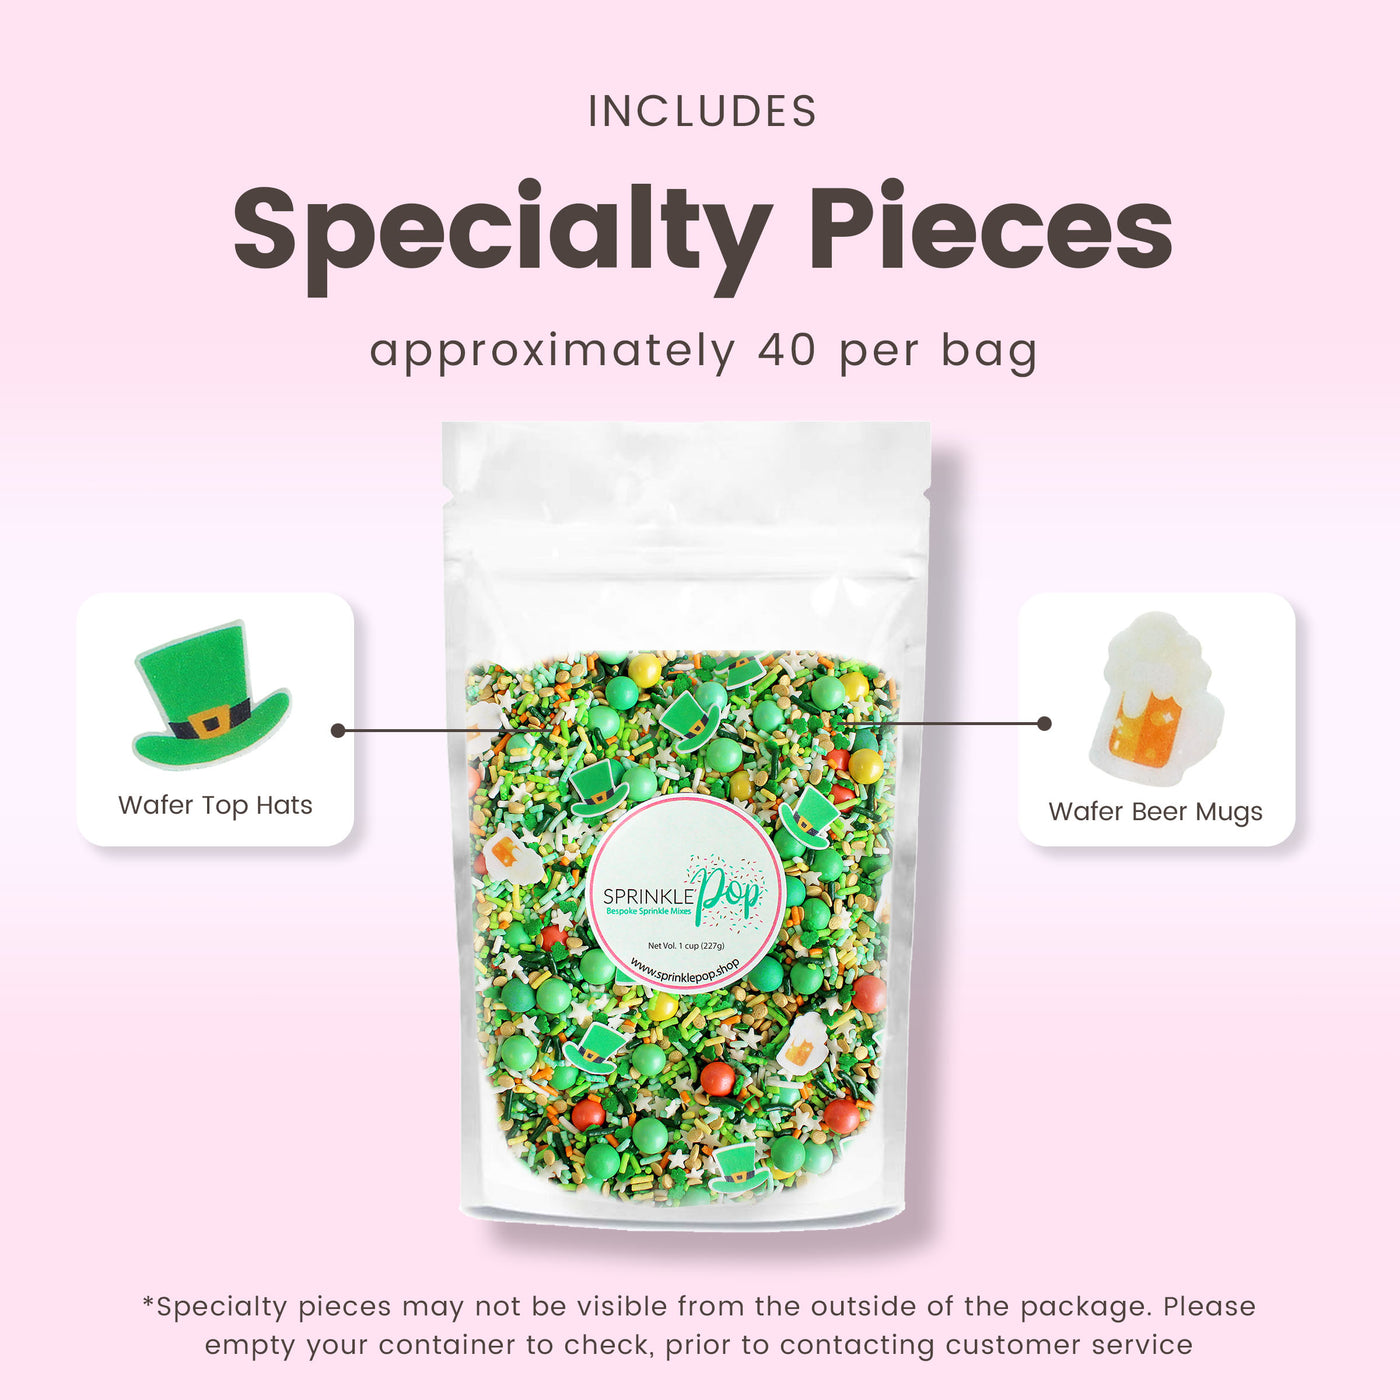 "Shenanigans Sprinkle Mix for St. Patrick's Day - vibrant green sprinkles with yellow and orange accents, featuring wafer paper beer mugs and leprechaun hats."